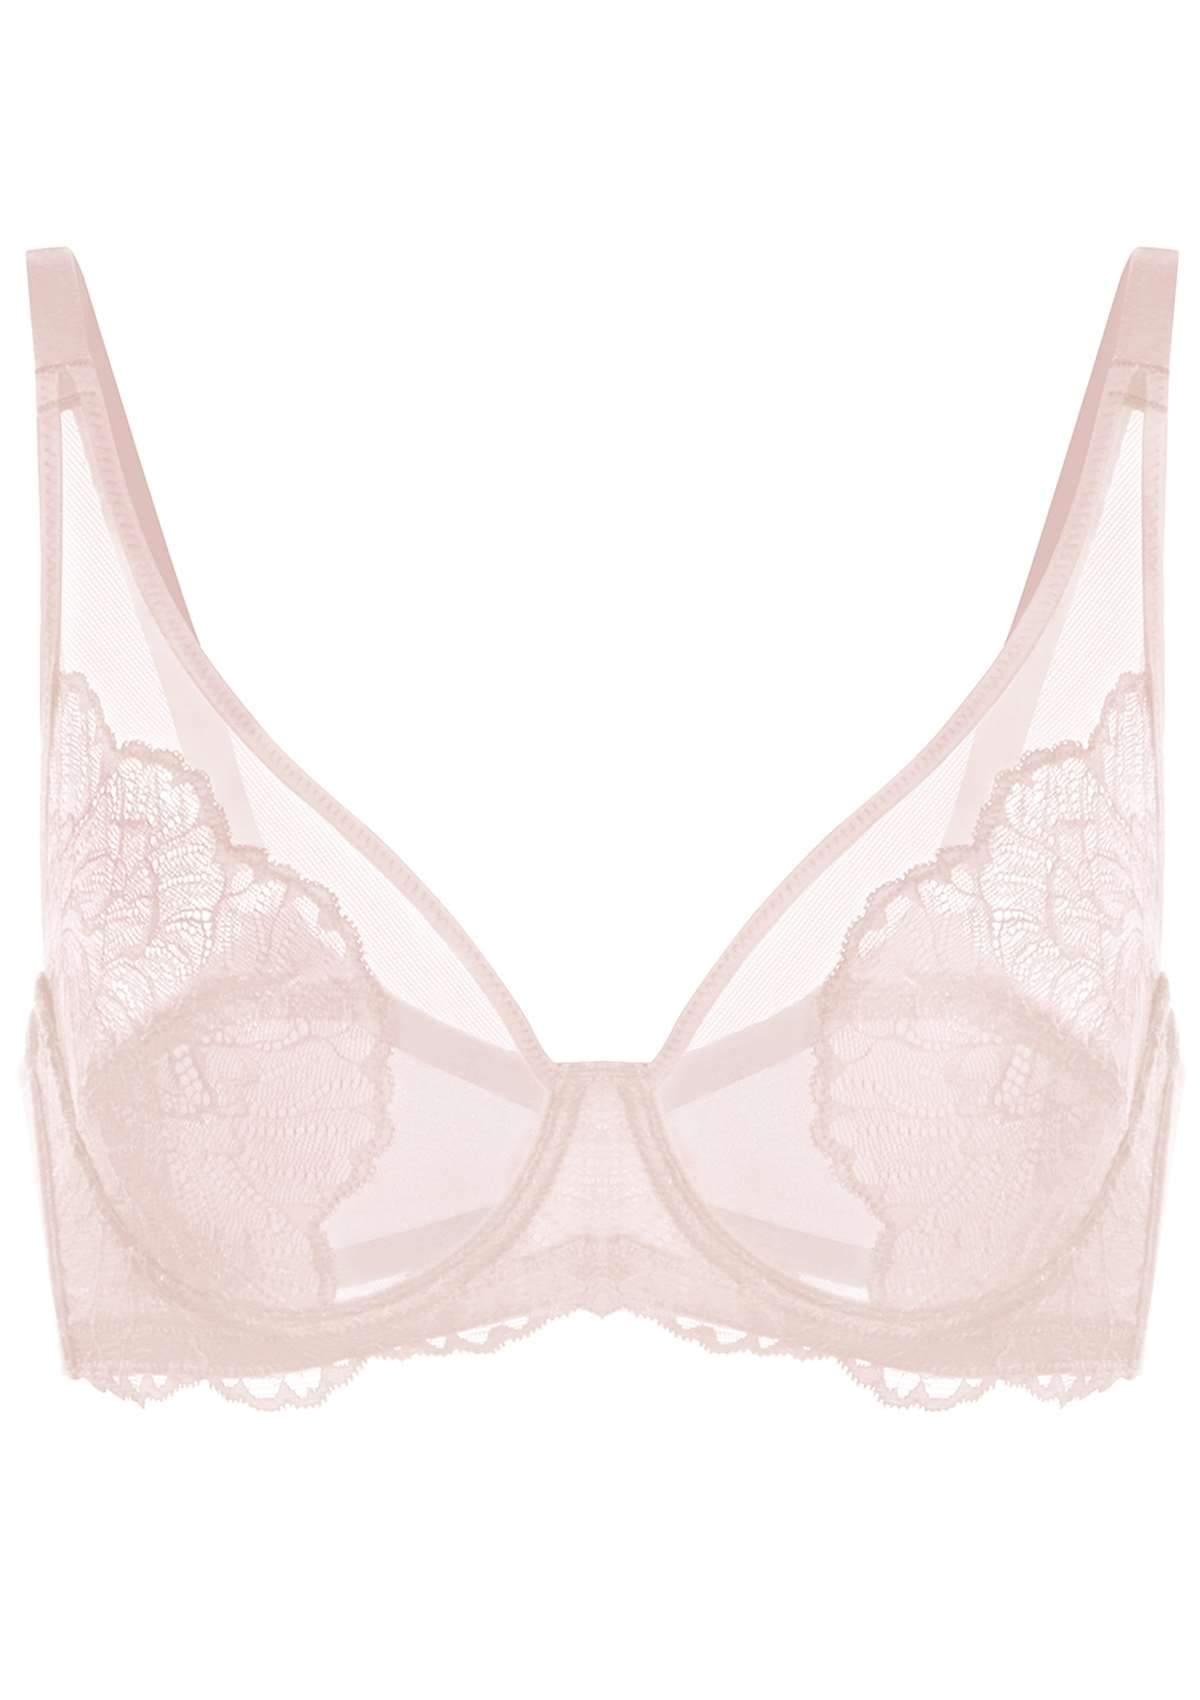 HSIA Blossom Lace Bra And Panties Set: Best Bra For Large Busts - Dark Pink / 36 / G